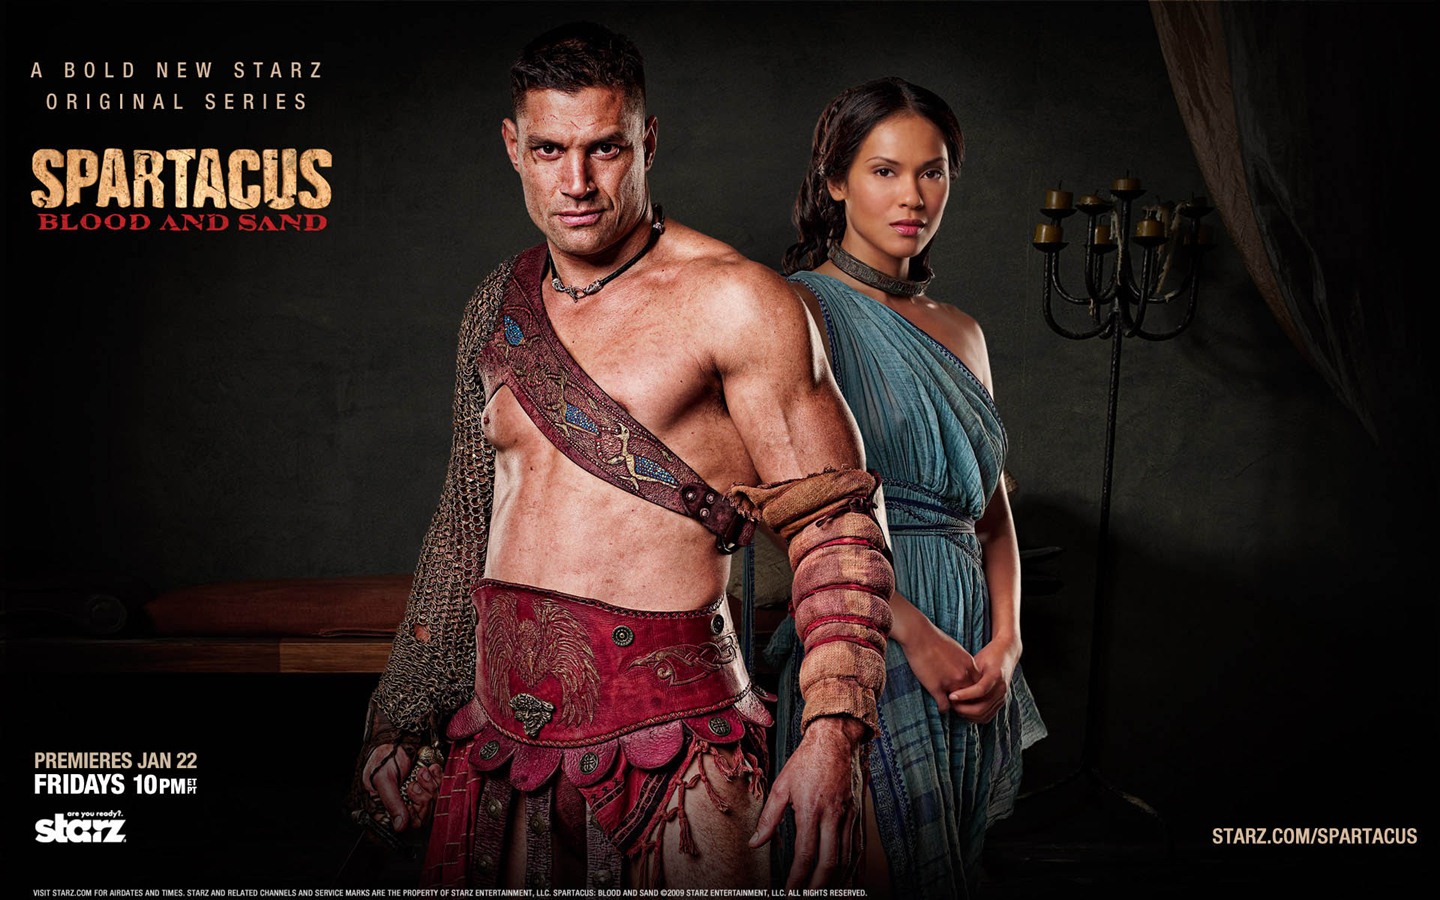 Spartacus: Blood and Sand HD Wallpaper #4 - 1440x900